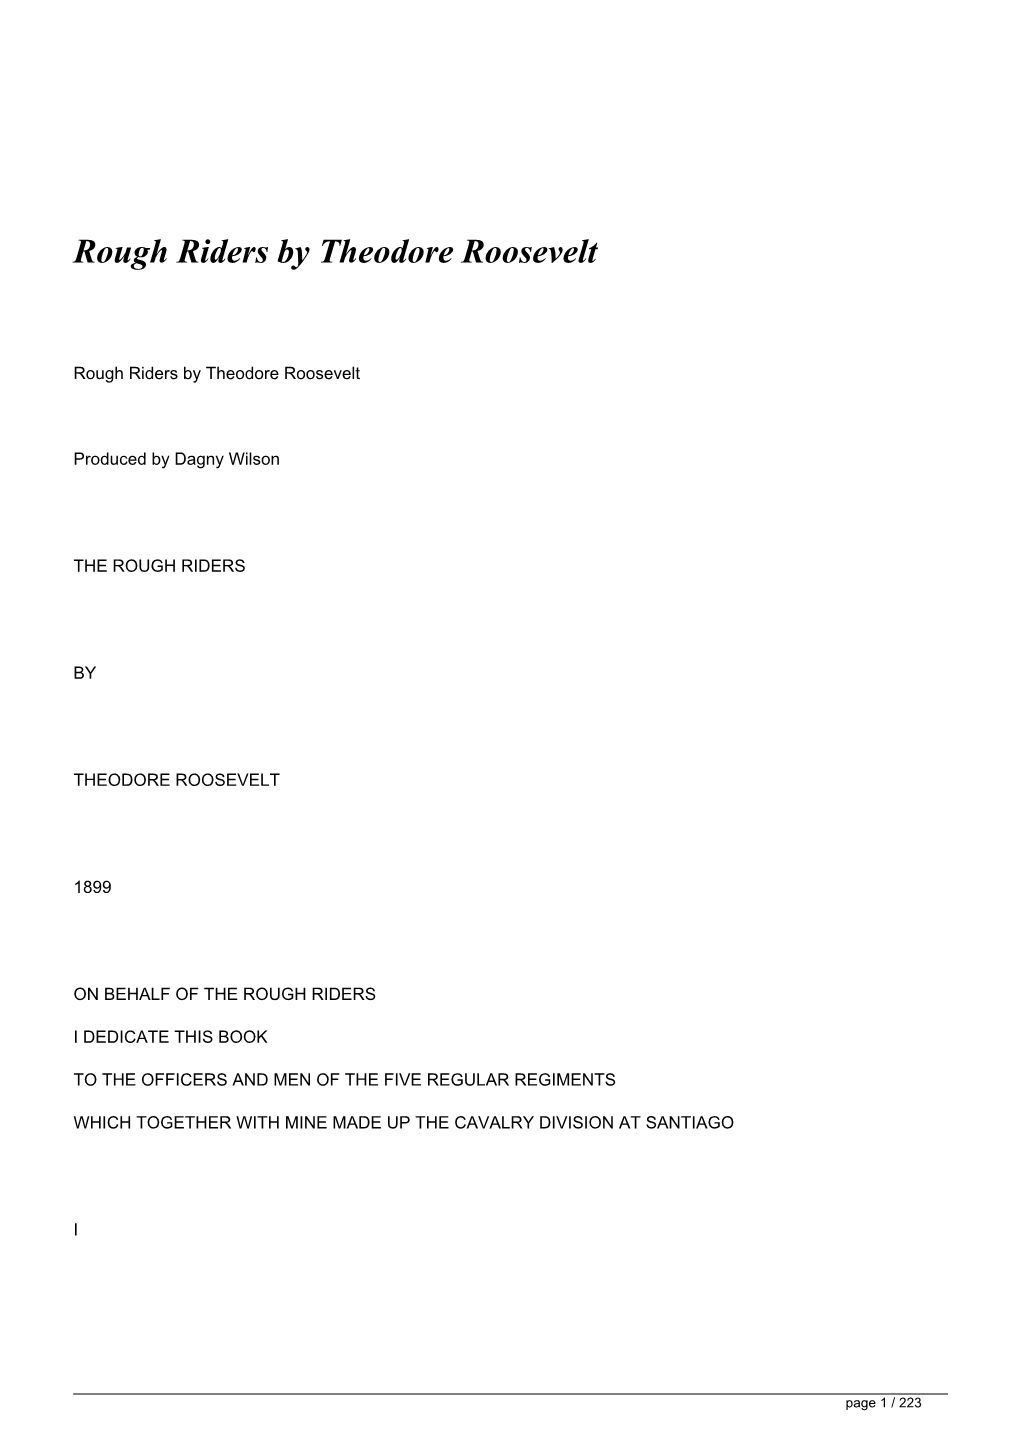 Rough Riders by Theodore Roosevelt&lt;/H1&gt;